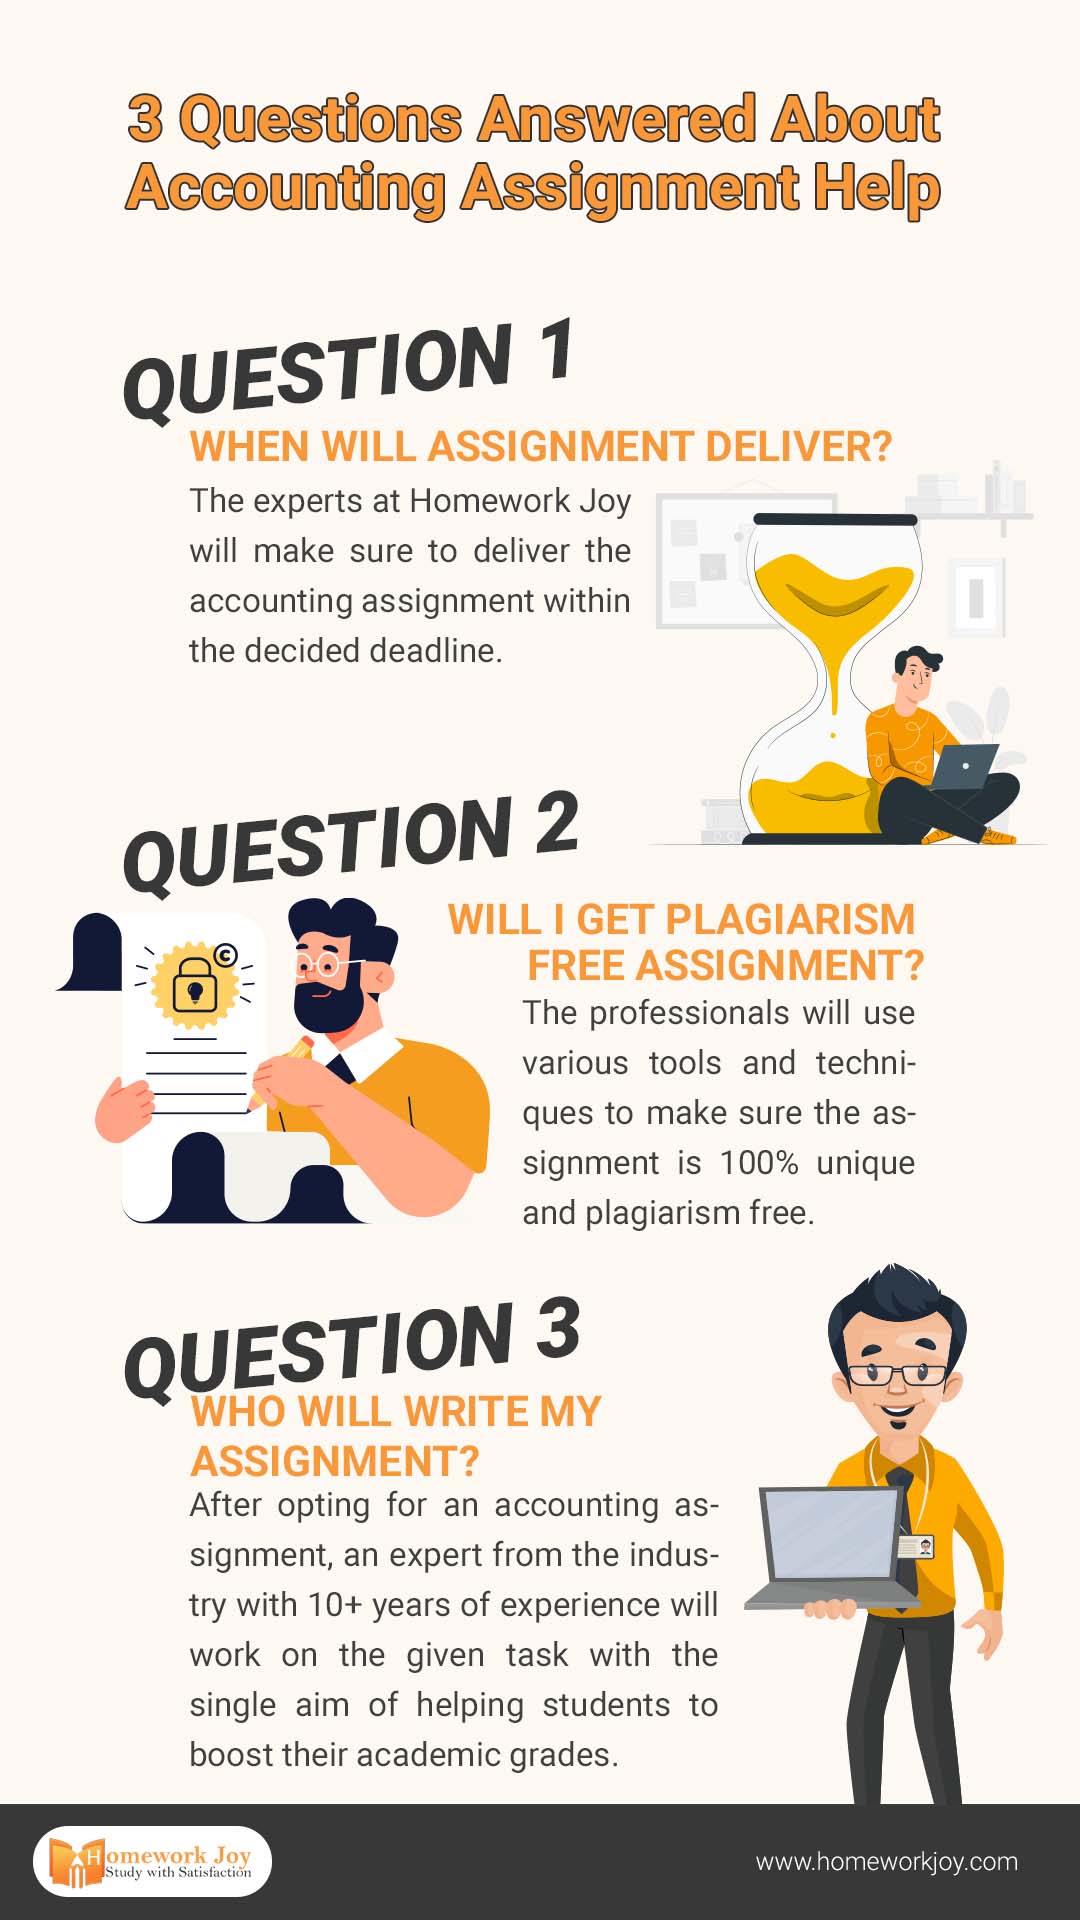 3 Questions Answered About Accounting Assignment Help